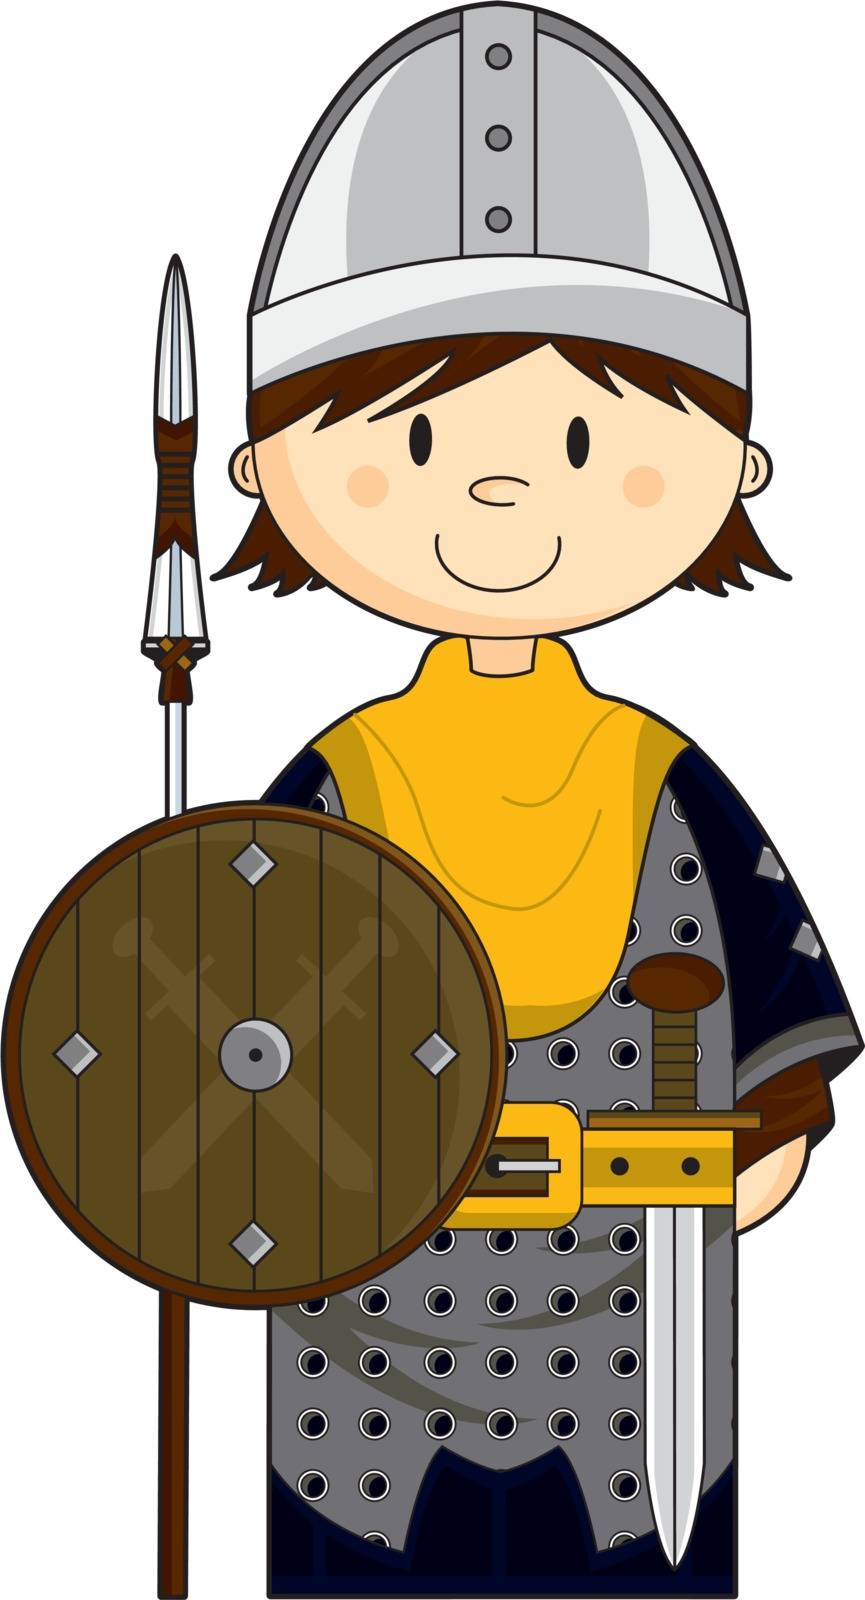 Cute Cartoon Medieval Soldier with Spear and Shield by Mark Murphy Creative